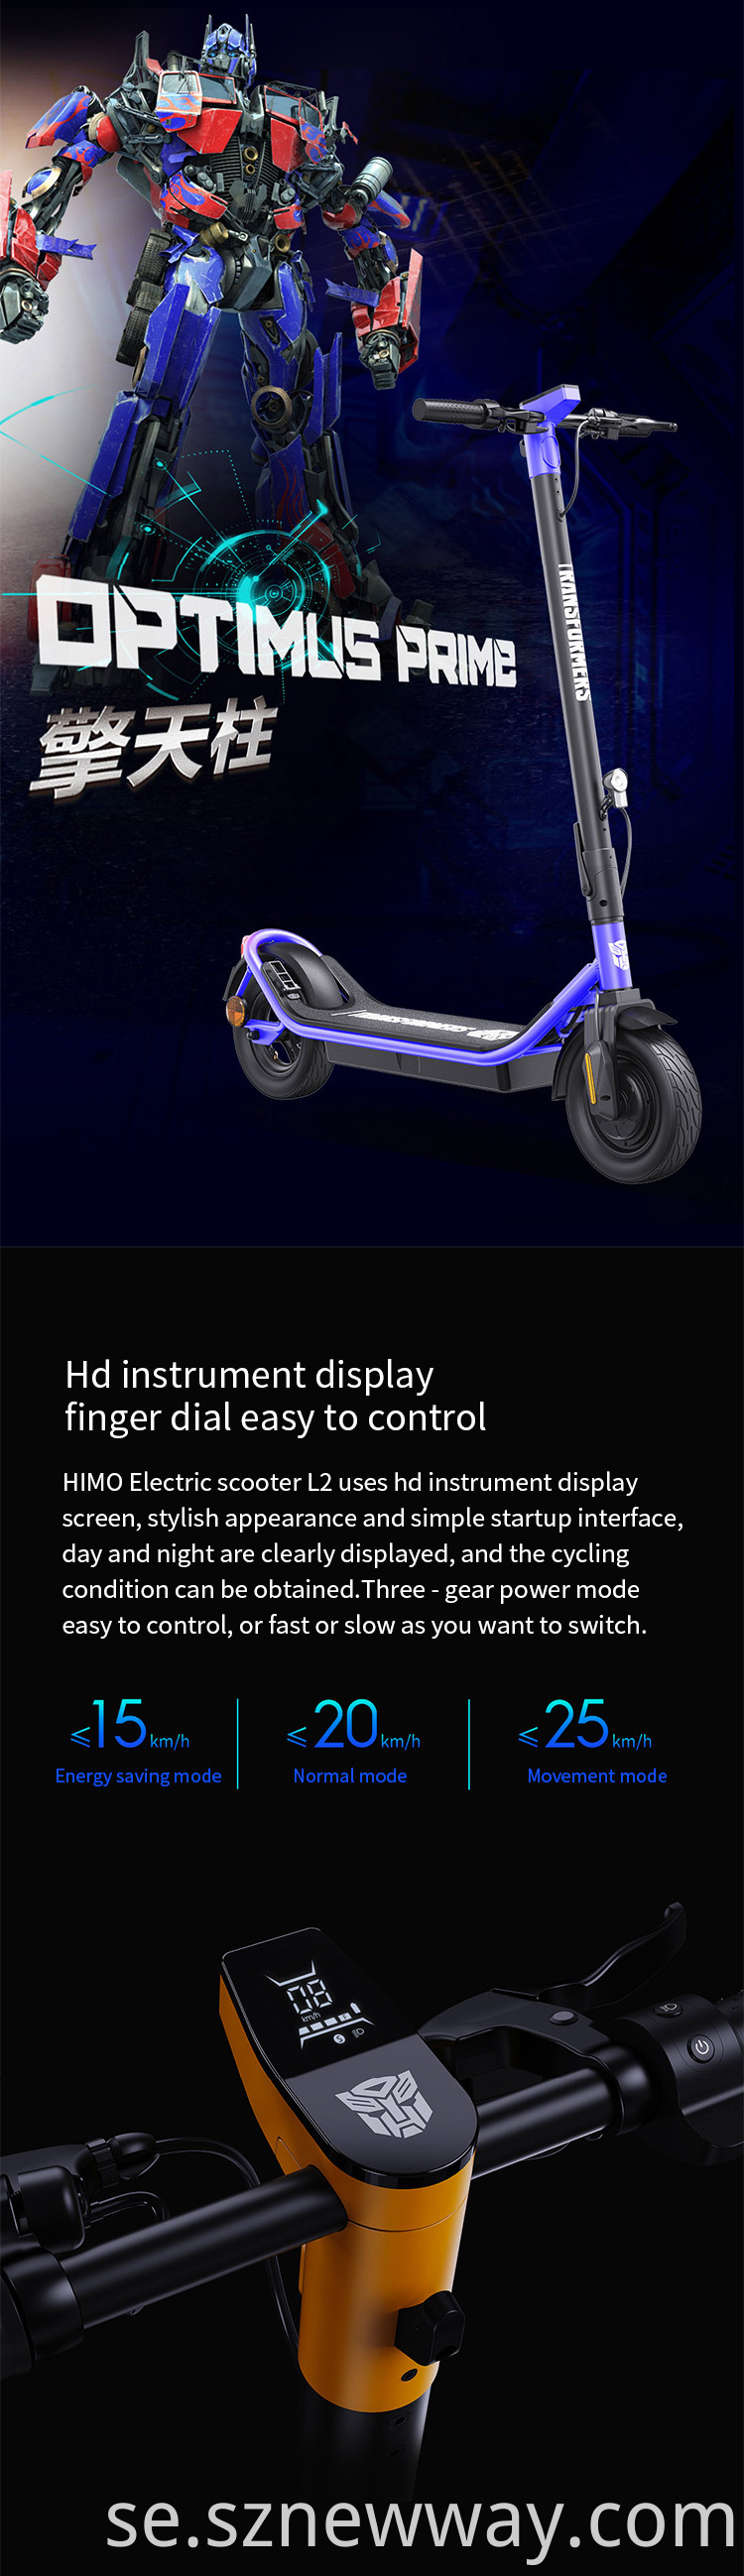 Himo Electric Scooter